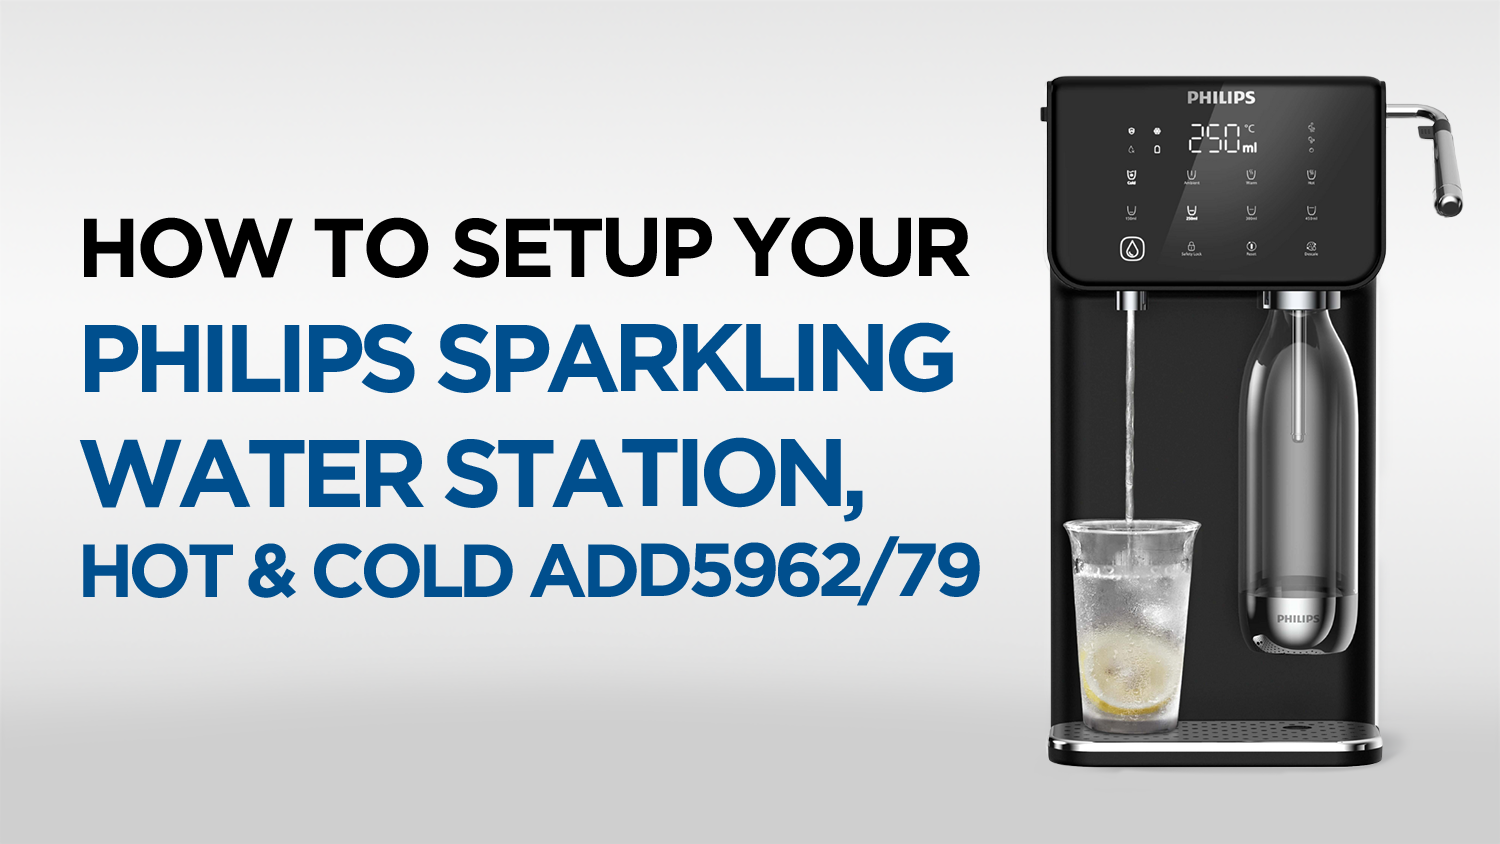 How to Set Up Your Philips Sparkling Water Station, Hot & Cold ADD5962/79